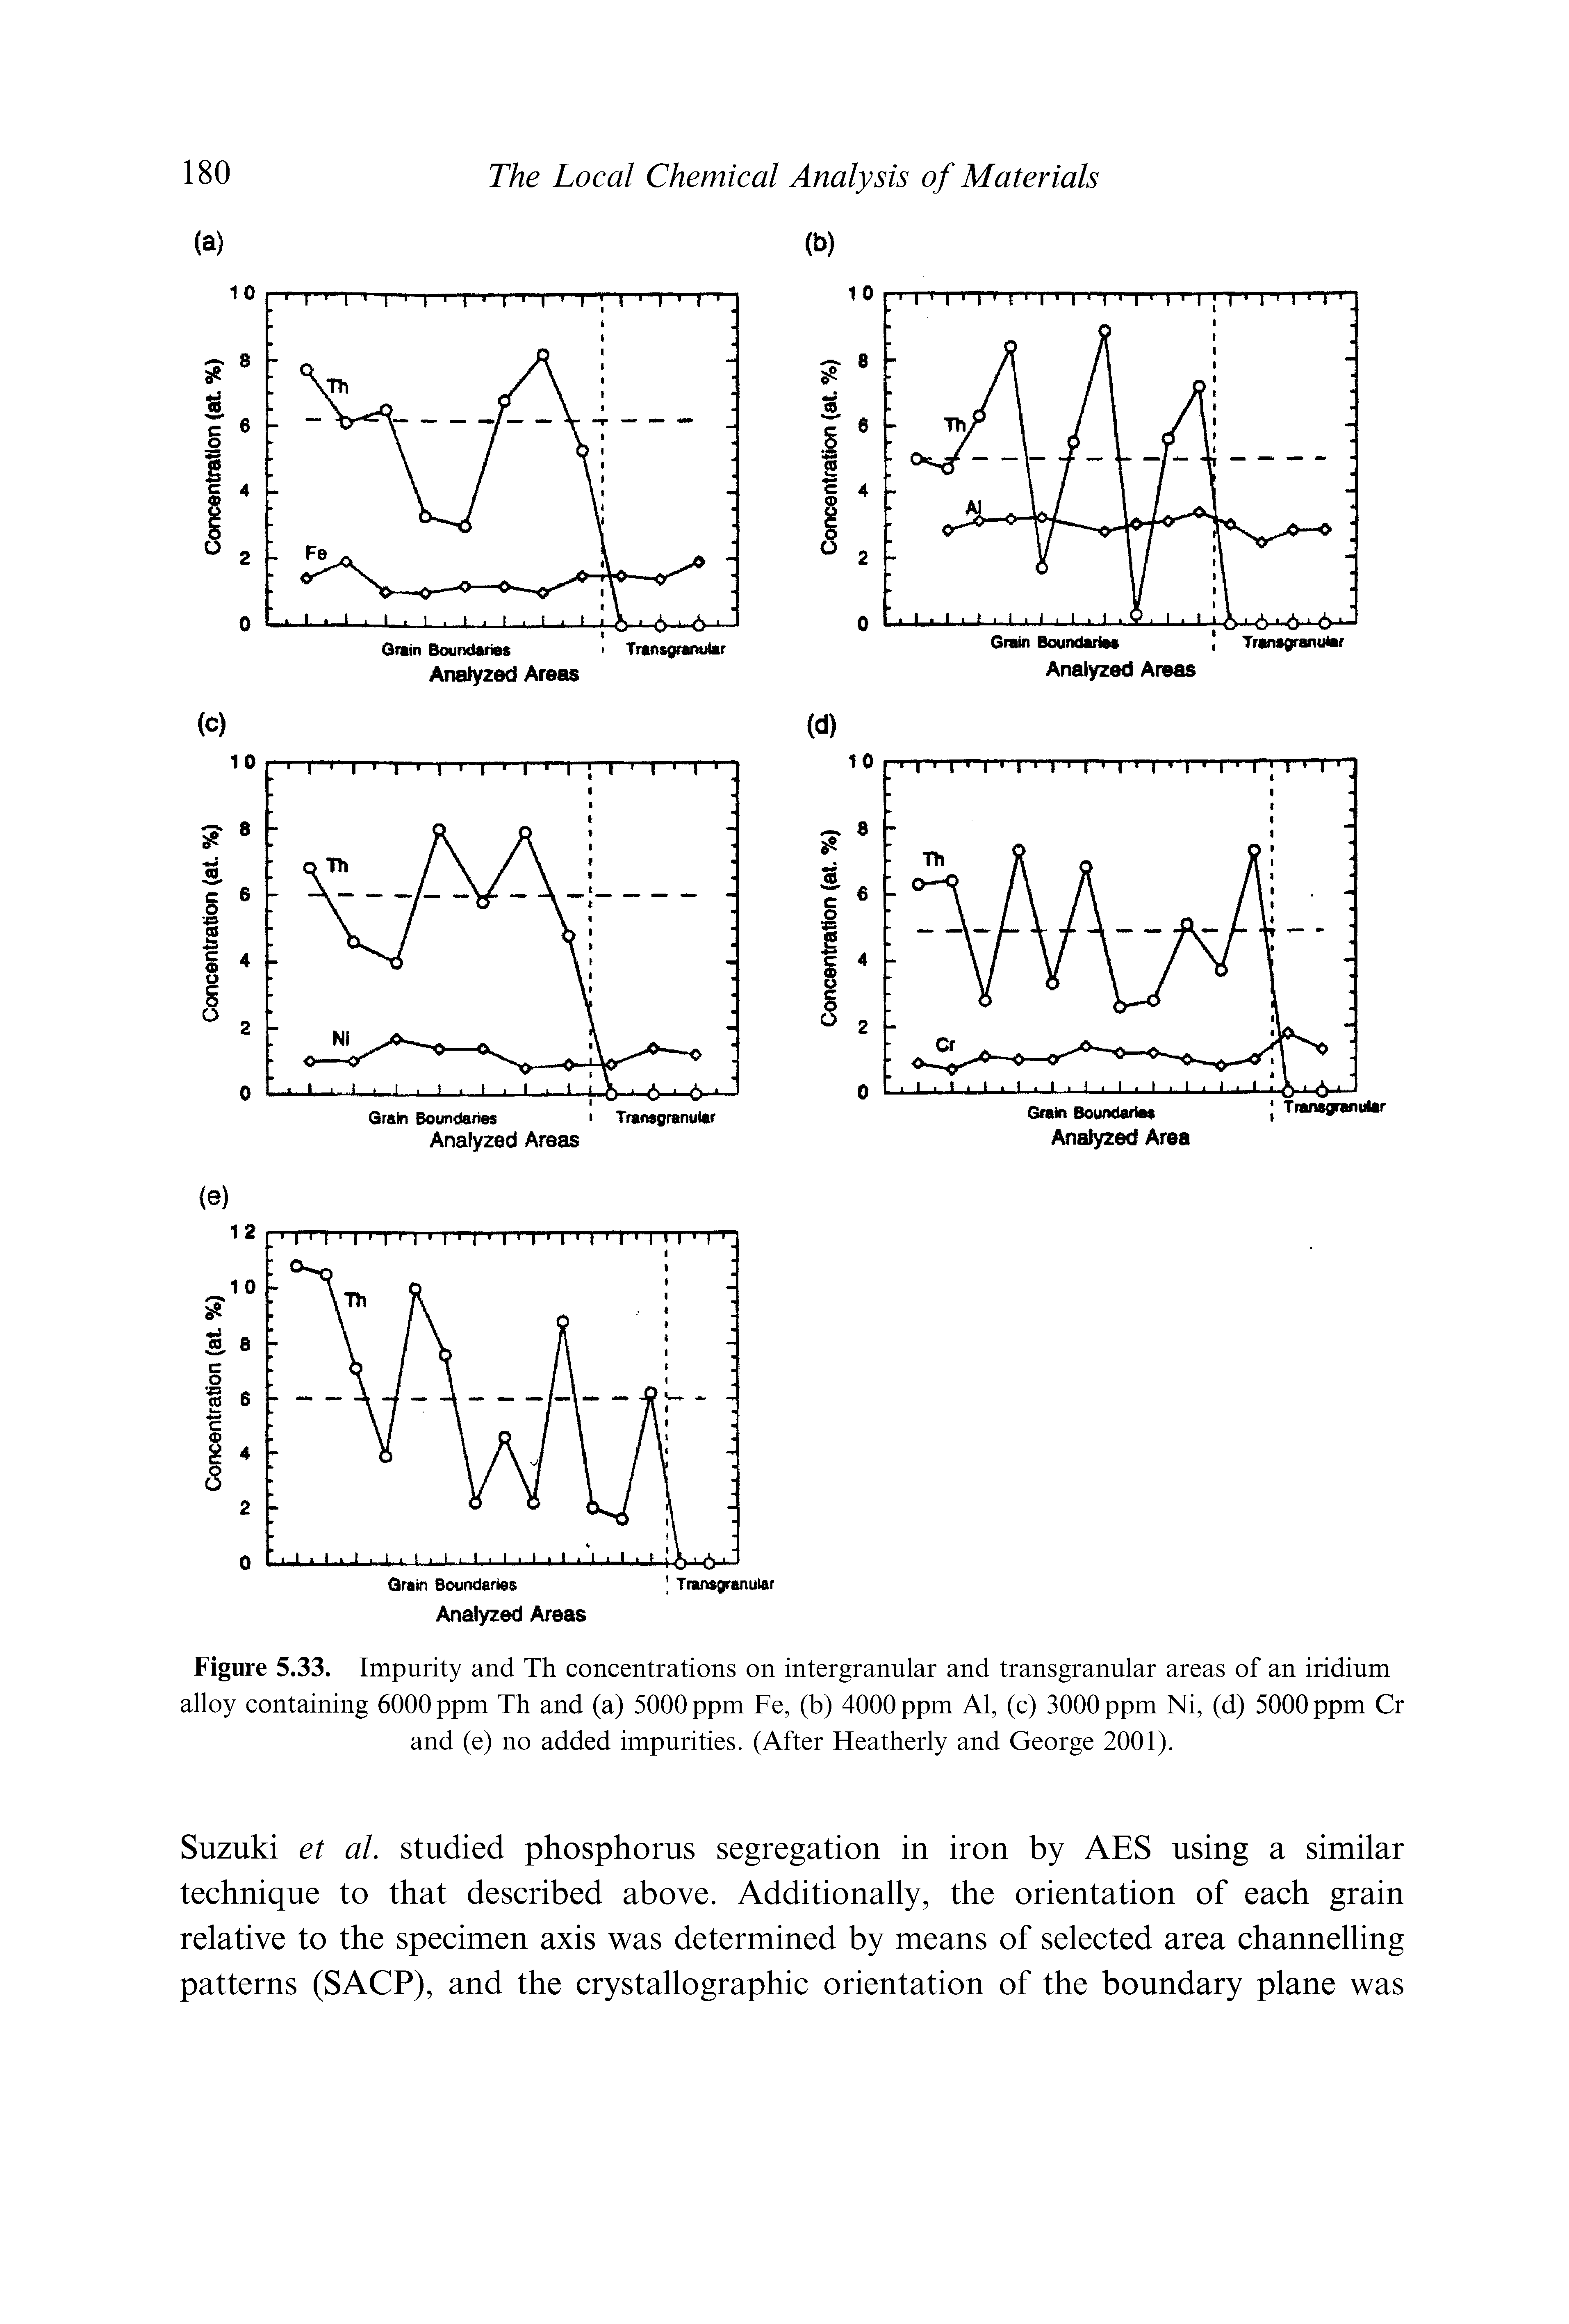 Figure 5.33. Impurity and Th concentrations on intergranular and transgranular areas of an iridium alloy containing 6000 ppm Th and (a) 5000 ppm Fe, (b) 4000 ppm Al, (c) 3000 ppm Ni, (d) 5000 ppm Cr and (e) no added impurities. (After Heatherly and George 2001).